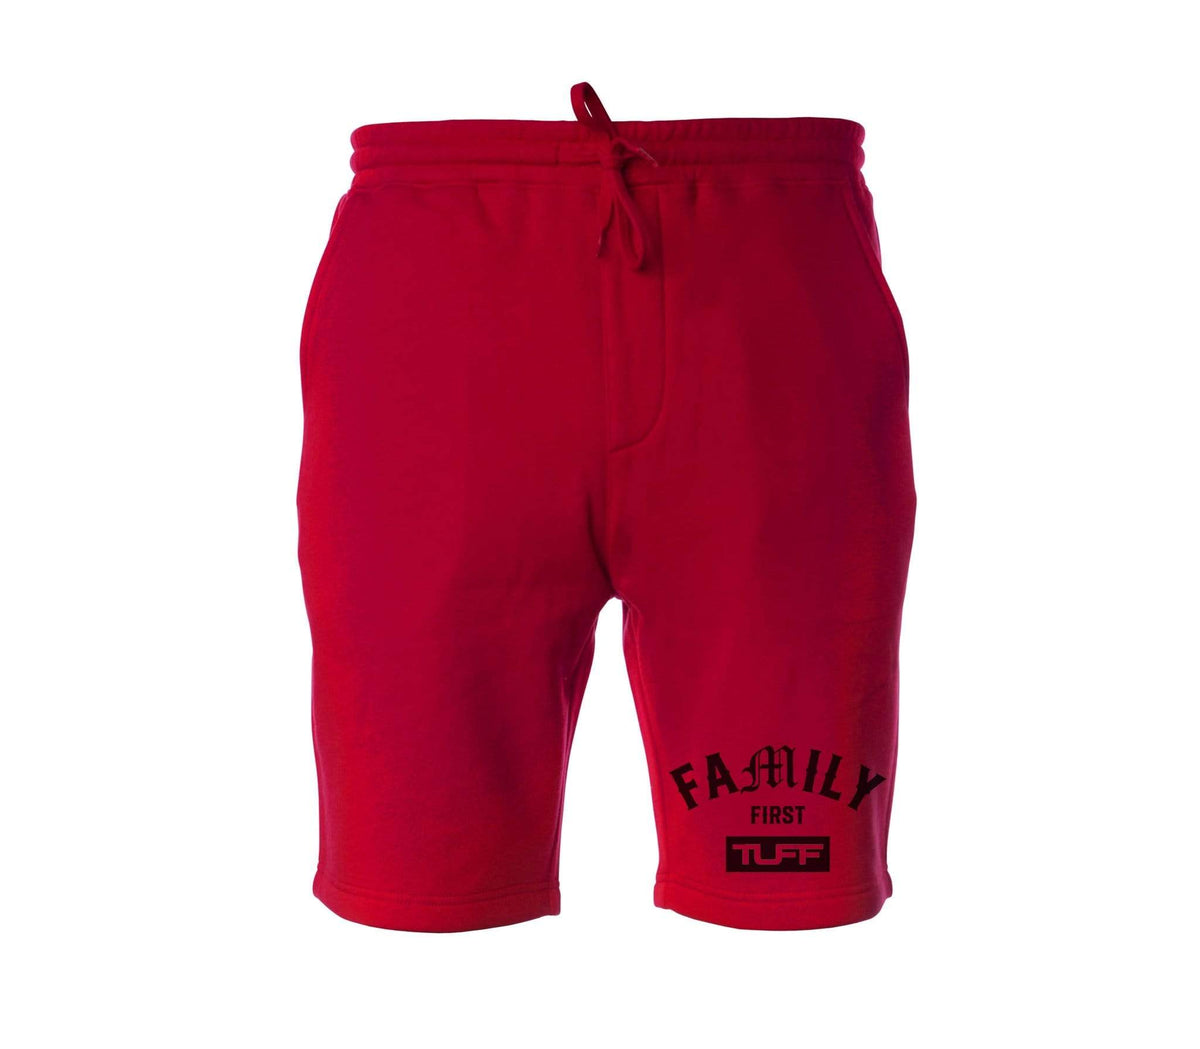 Family First TUFF Tapered Fleece Shorts XS / Red TuffWraps.com